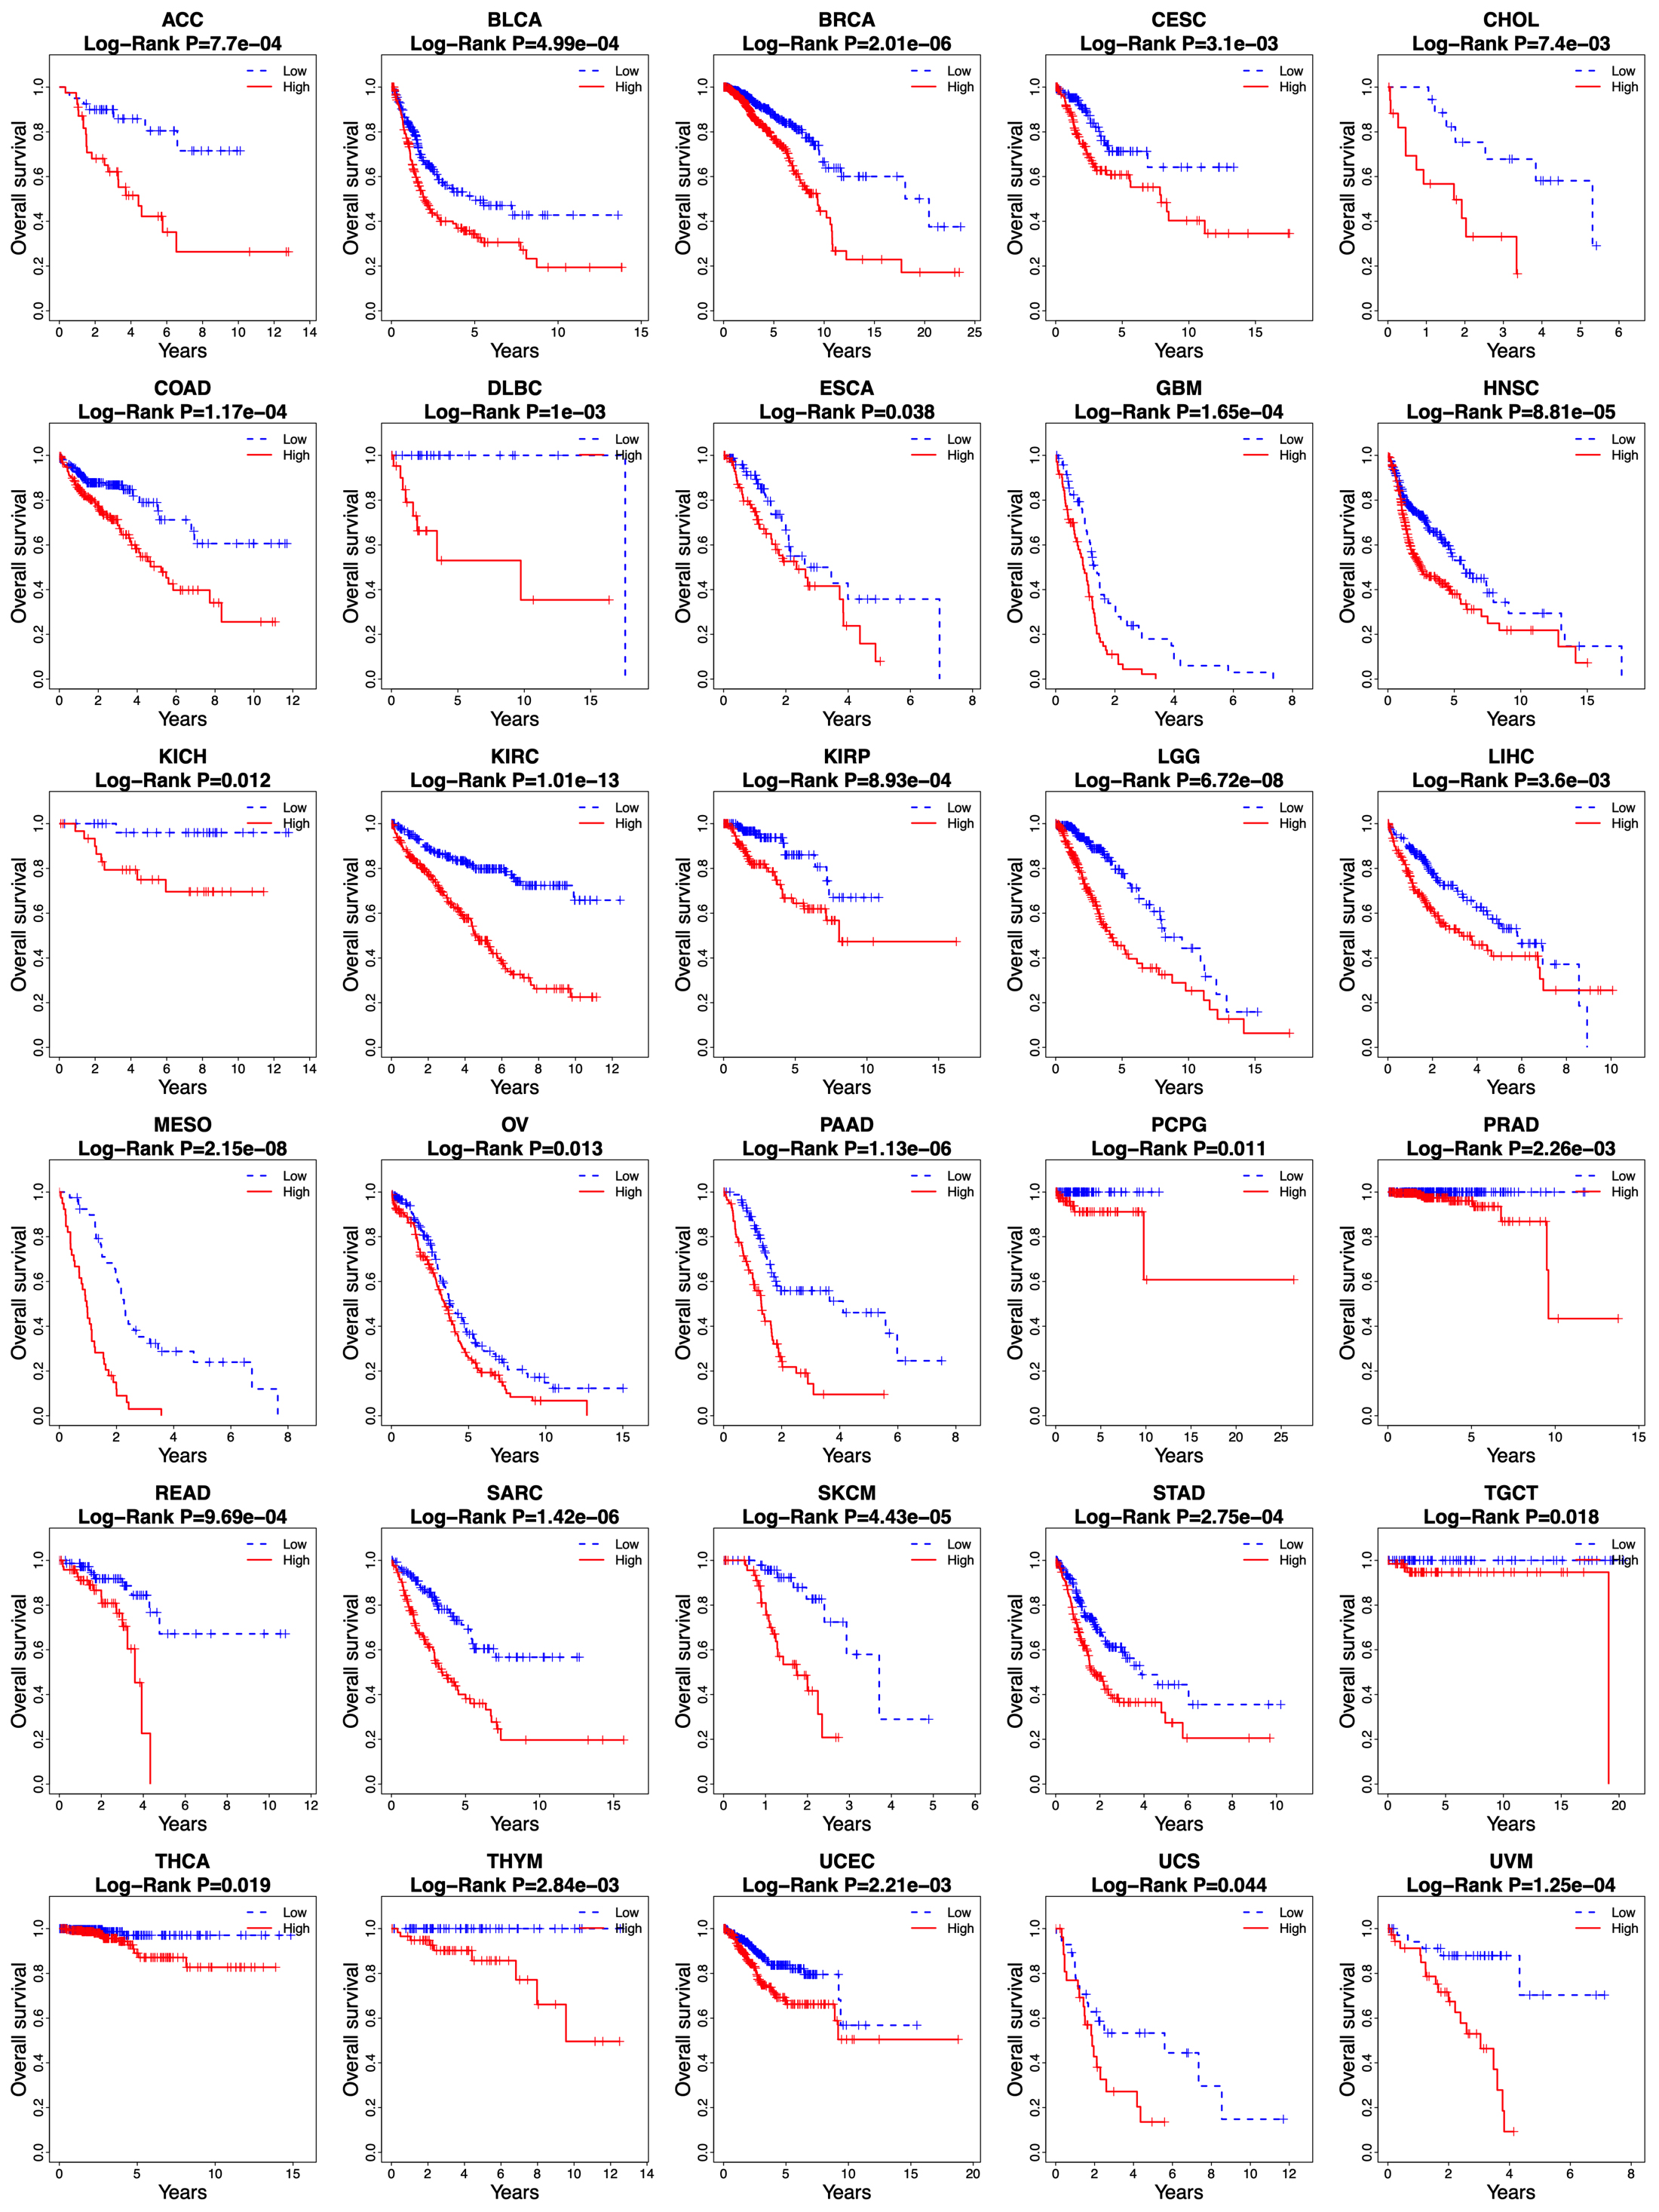 Kaplan-Meier curves of overall survival between low-risk and high-risk groups in other 30 cancer types in the TCGA database.